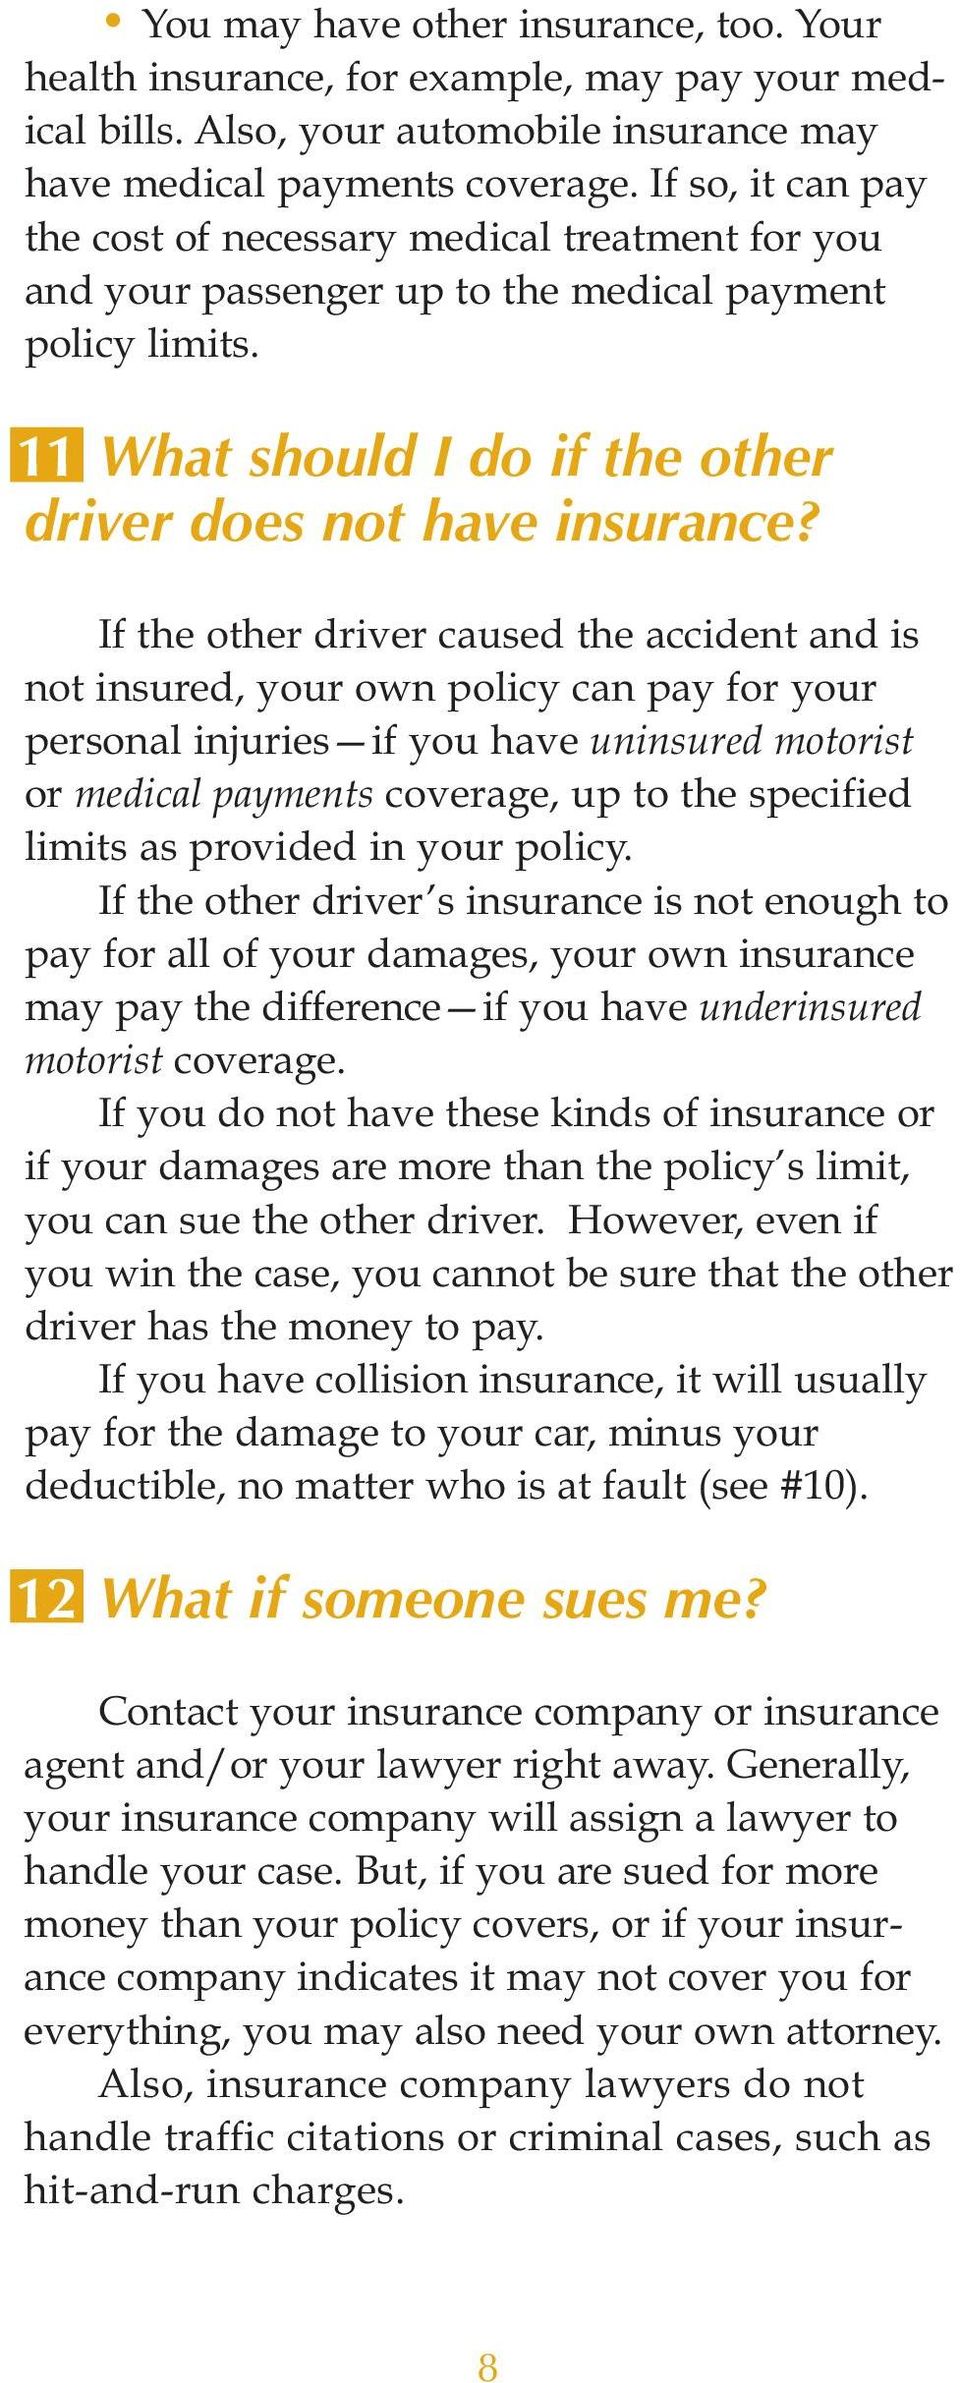 If the other driver caused the accident and is not insured, your own policy can pay for your personal injuries if you have uninsured motorist or medical payments coverage, up to the specified limits